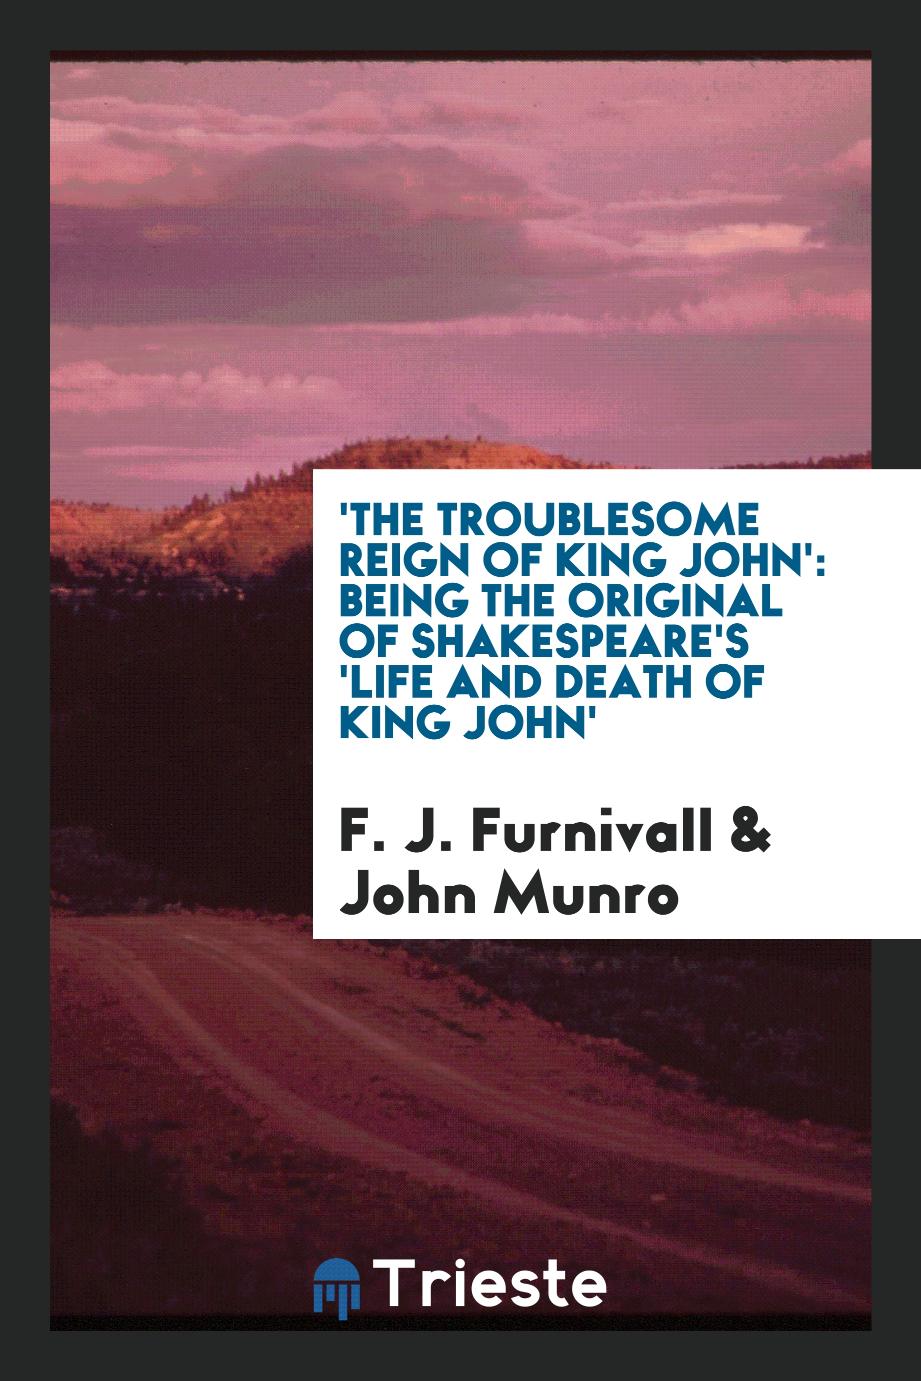 'The Troublesome reign of King John': being the original of Shakespeare's 'Life and death of King John'